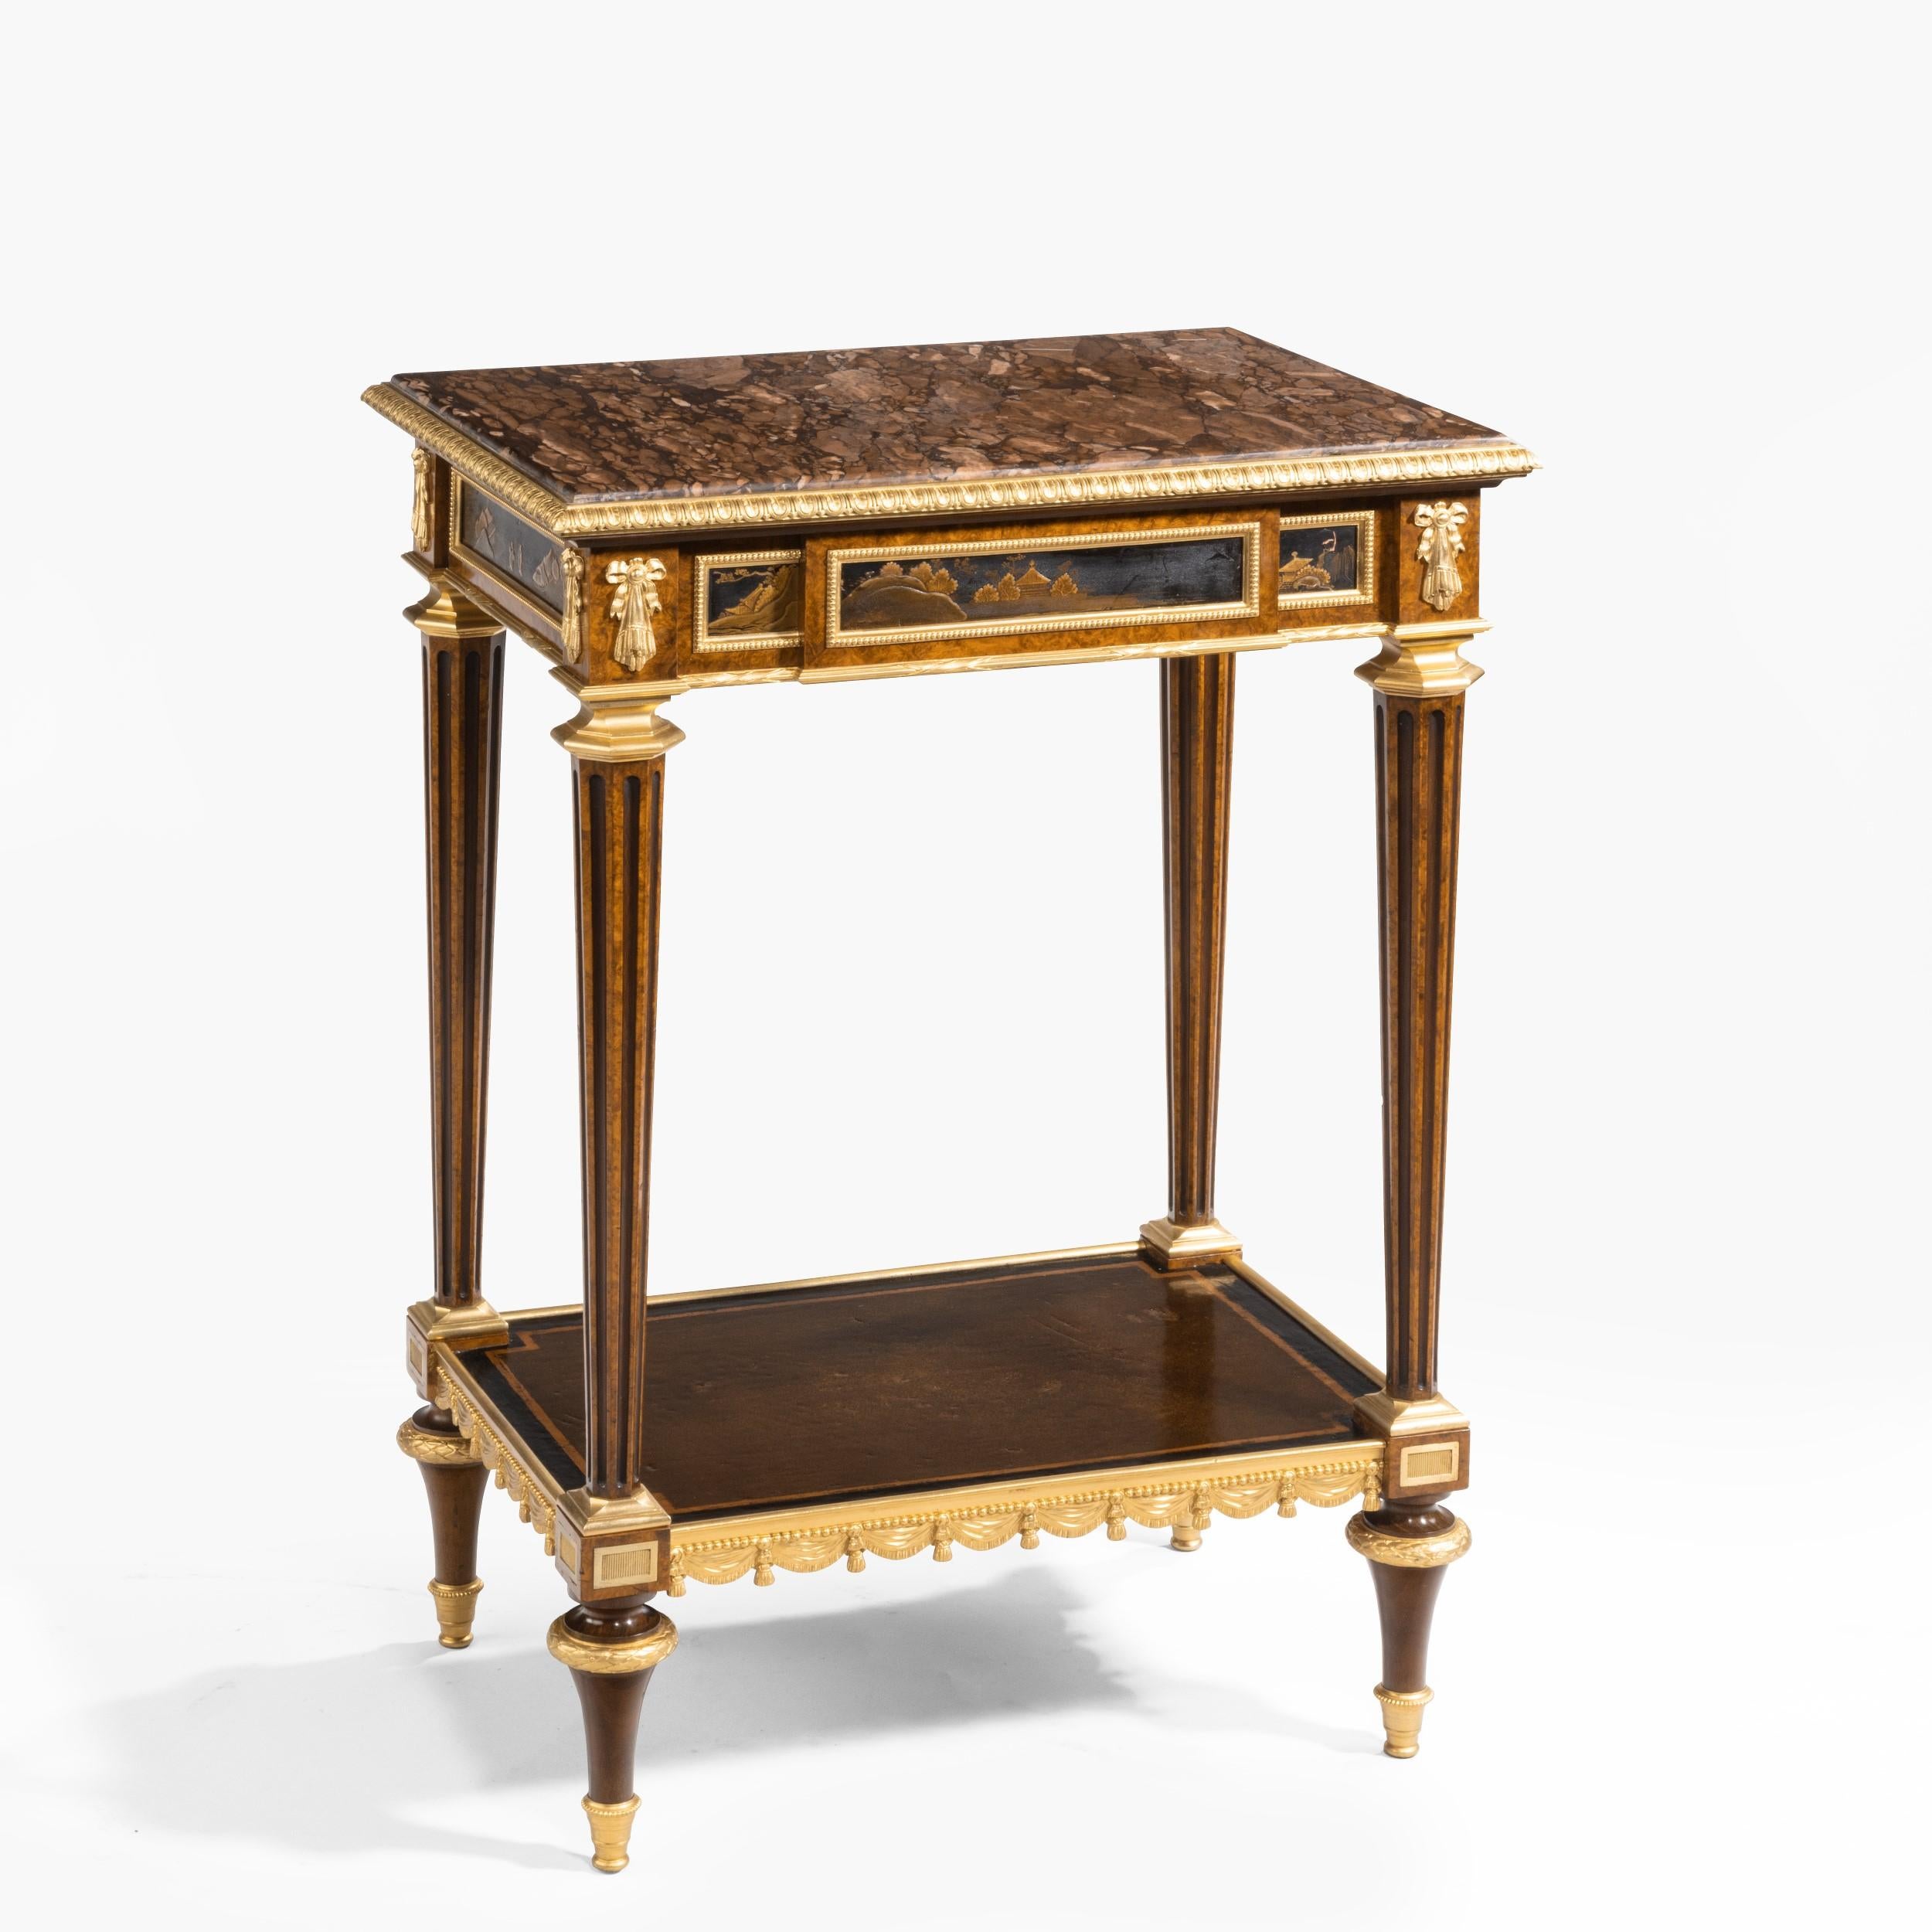 Gilt Antique Ormolu-Mounted Side Table in the Louis XVI Manner by Henry Dasson